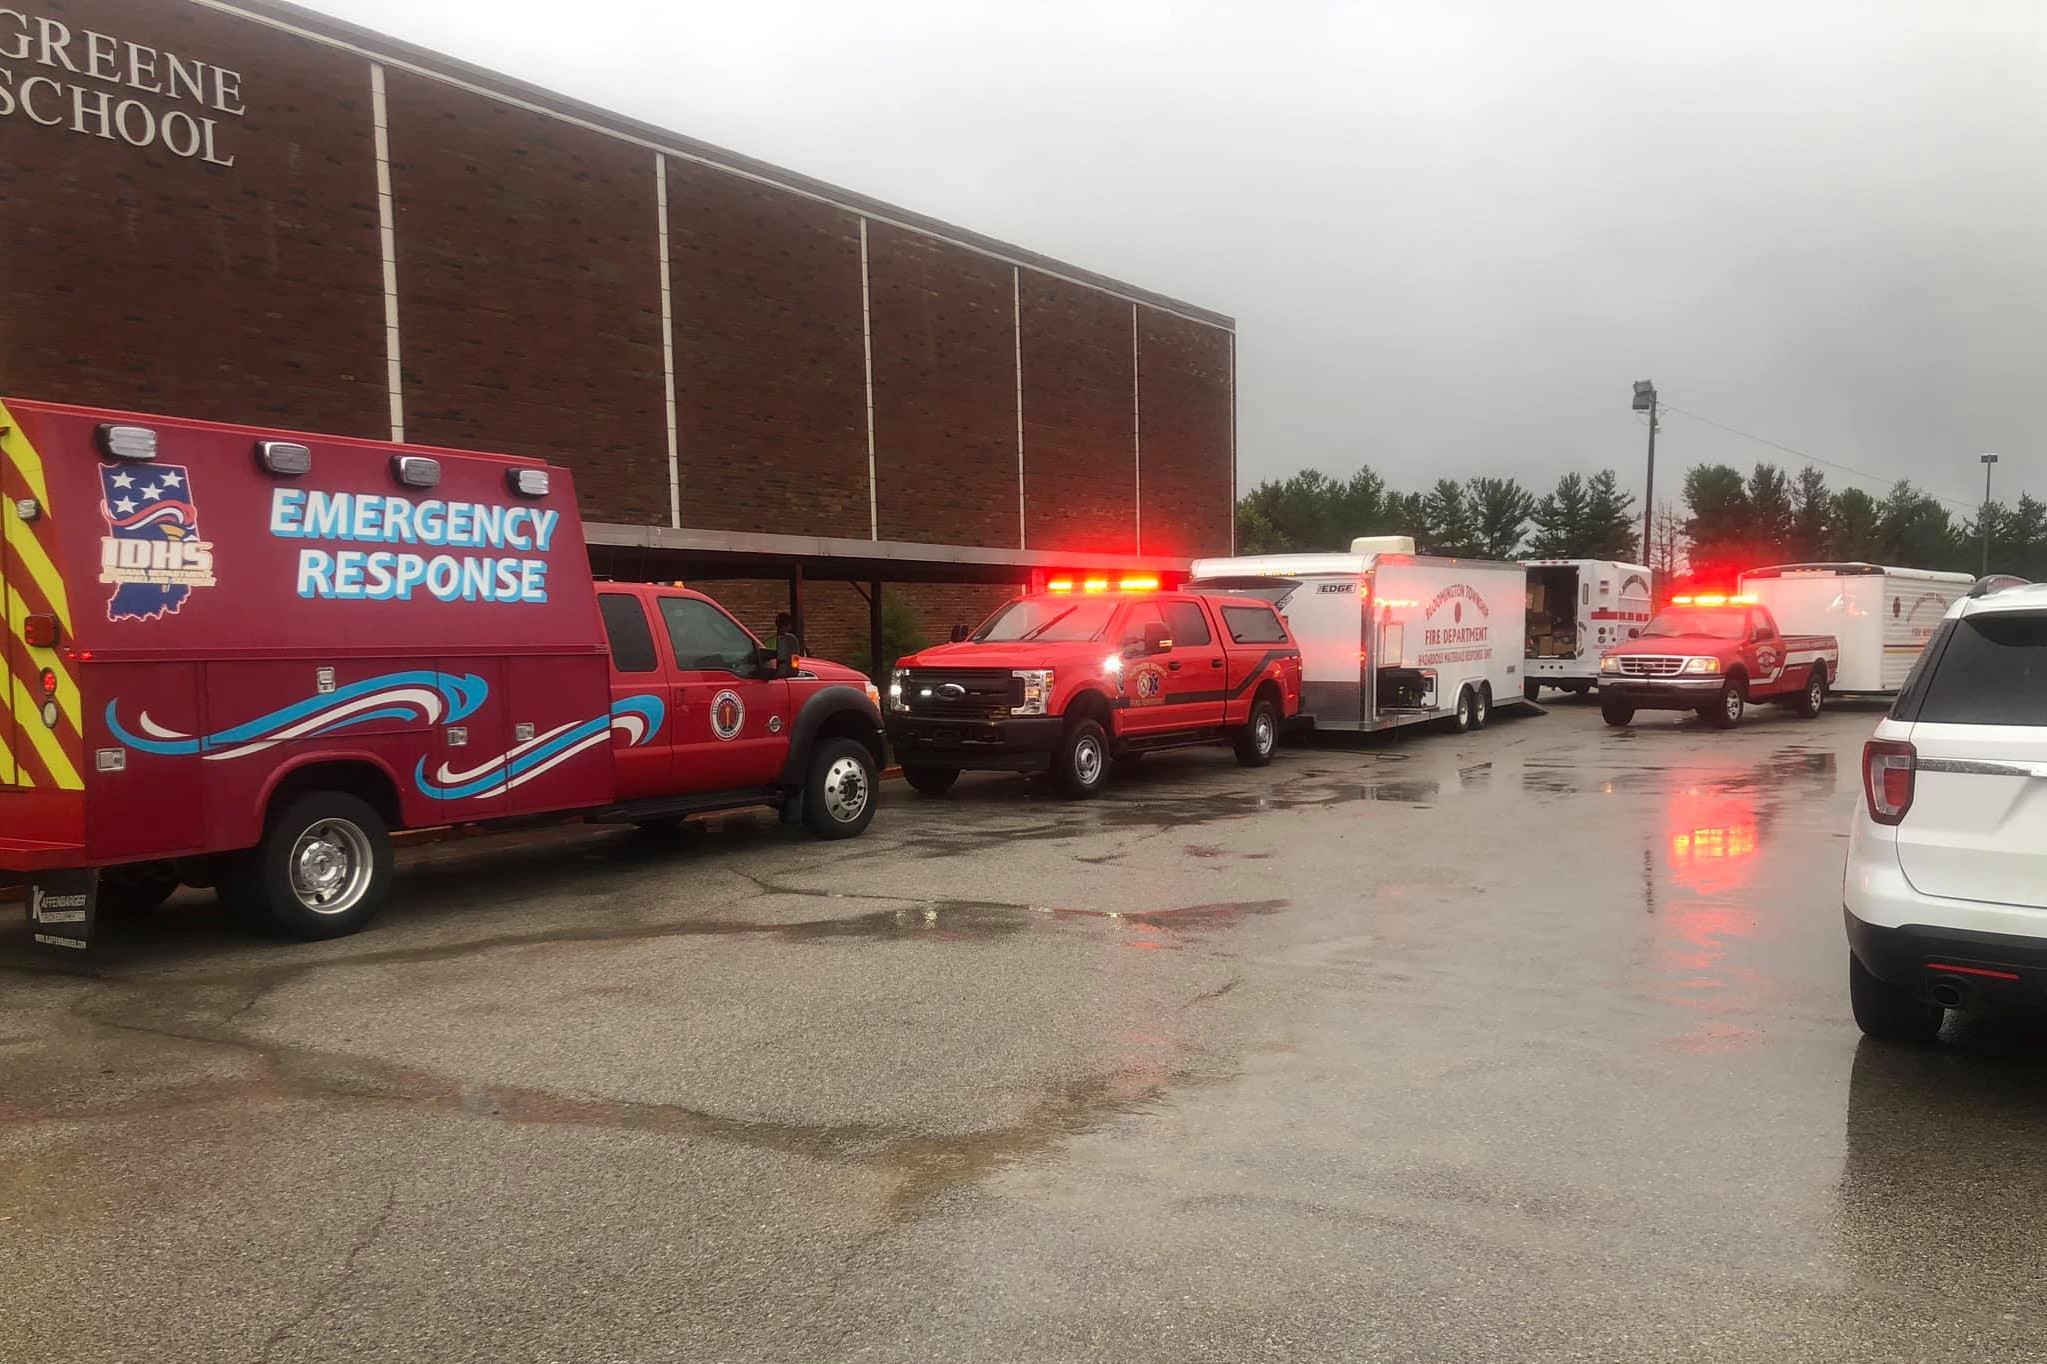 Emergency vehicales respond to a hazardous material incident at Eastern Greene Middle School Aug. 22, 2019.